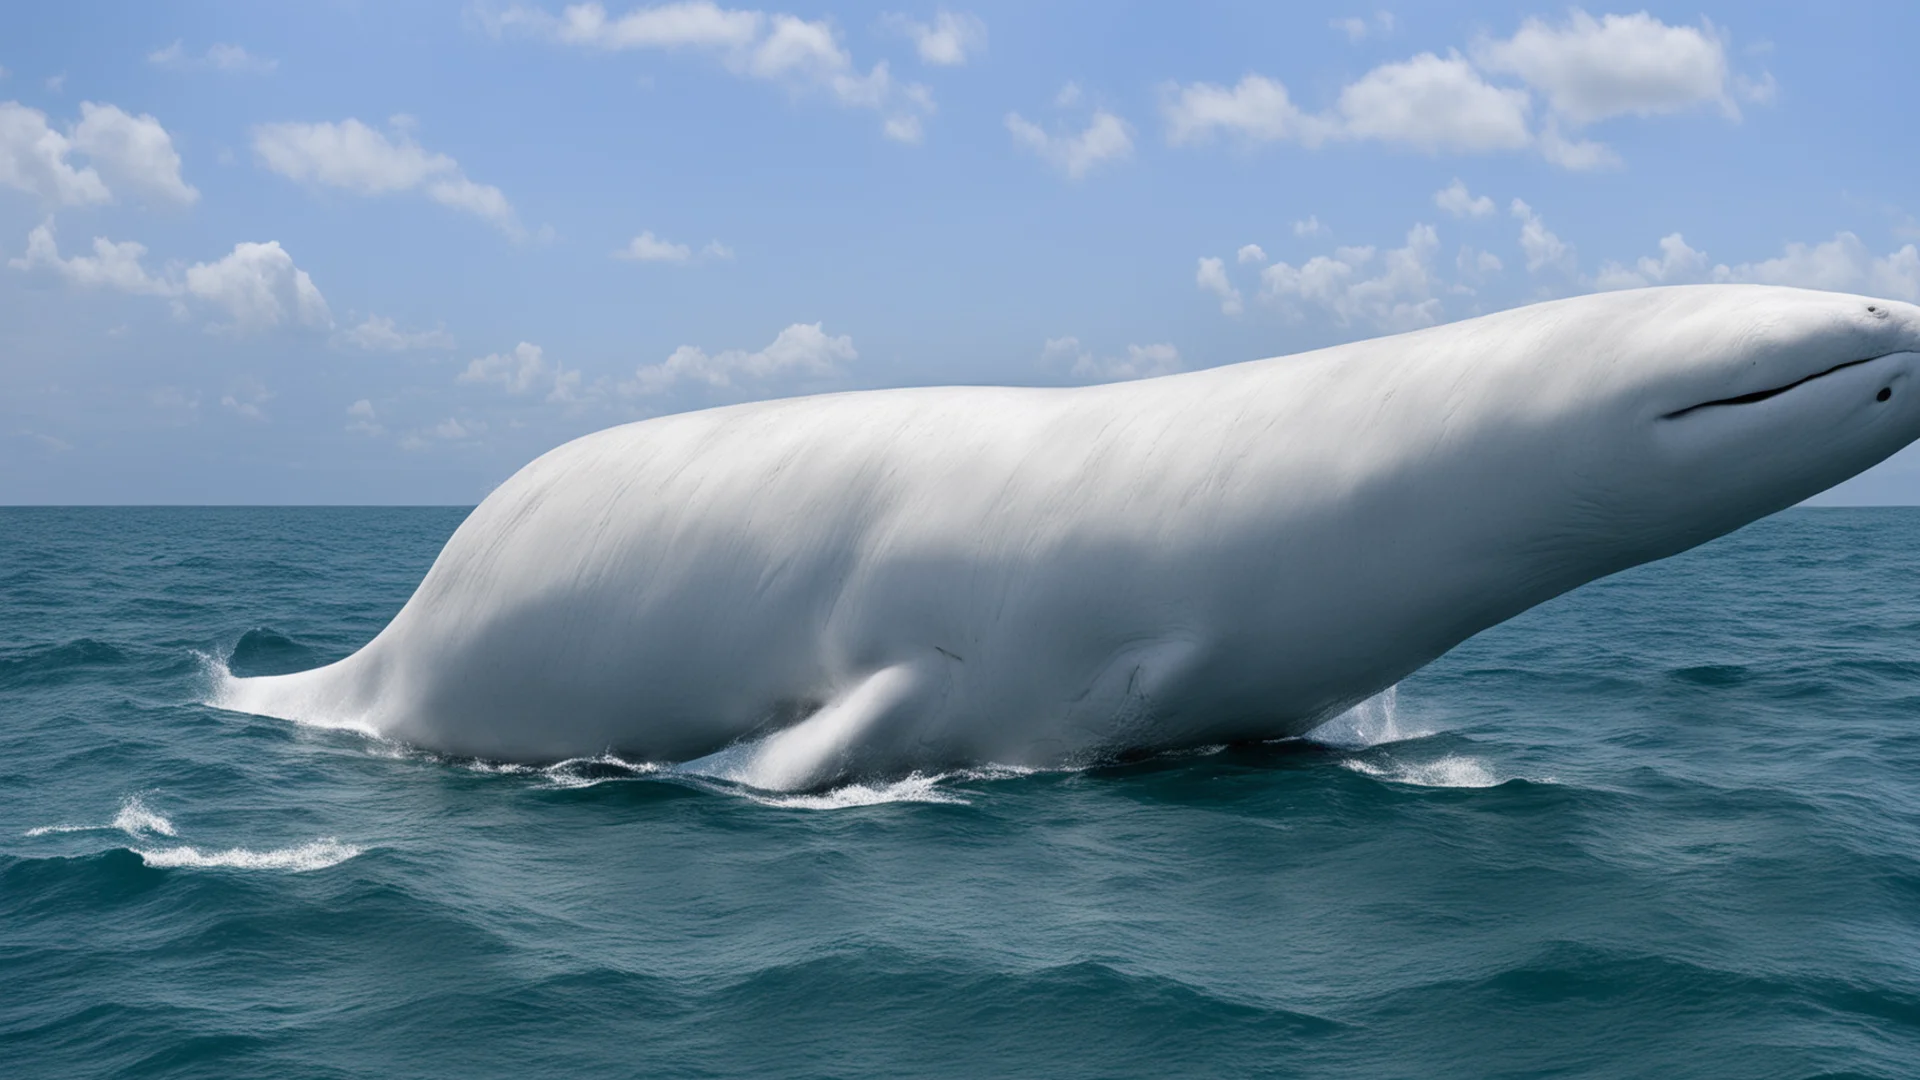 aia very big white sperm whale in the ocean  alongside a boat wide